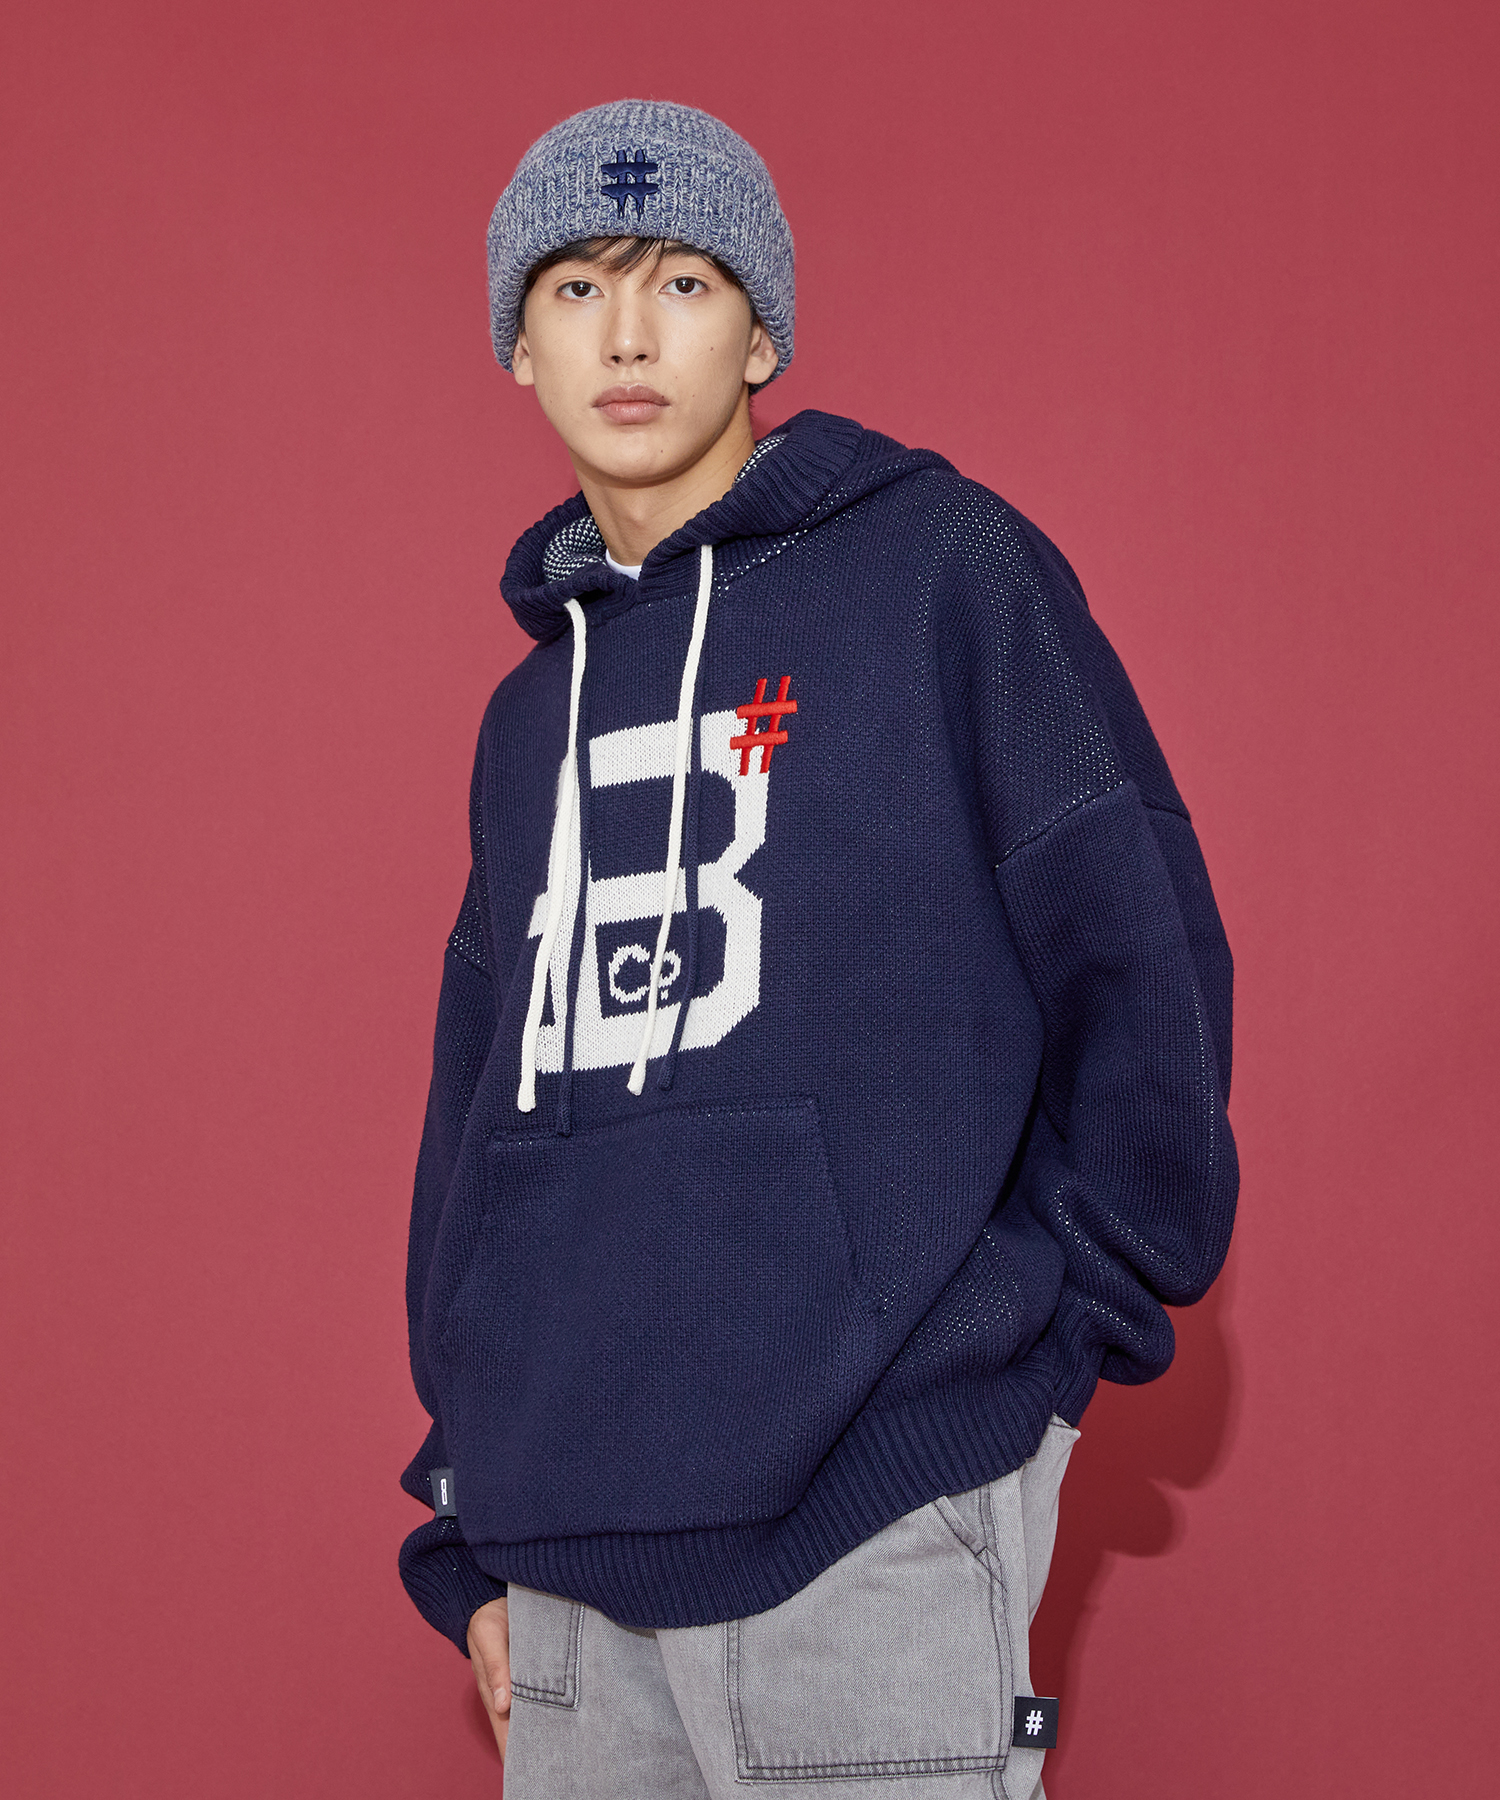 BEENTRILL X BROOKLYNDENIMCO OVERFIT HOODED KNIT SANS 니트후드 (NAVY)